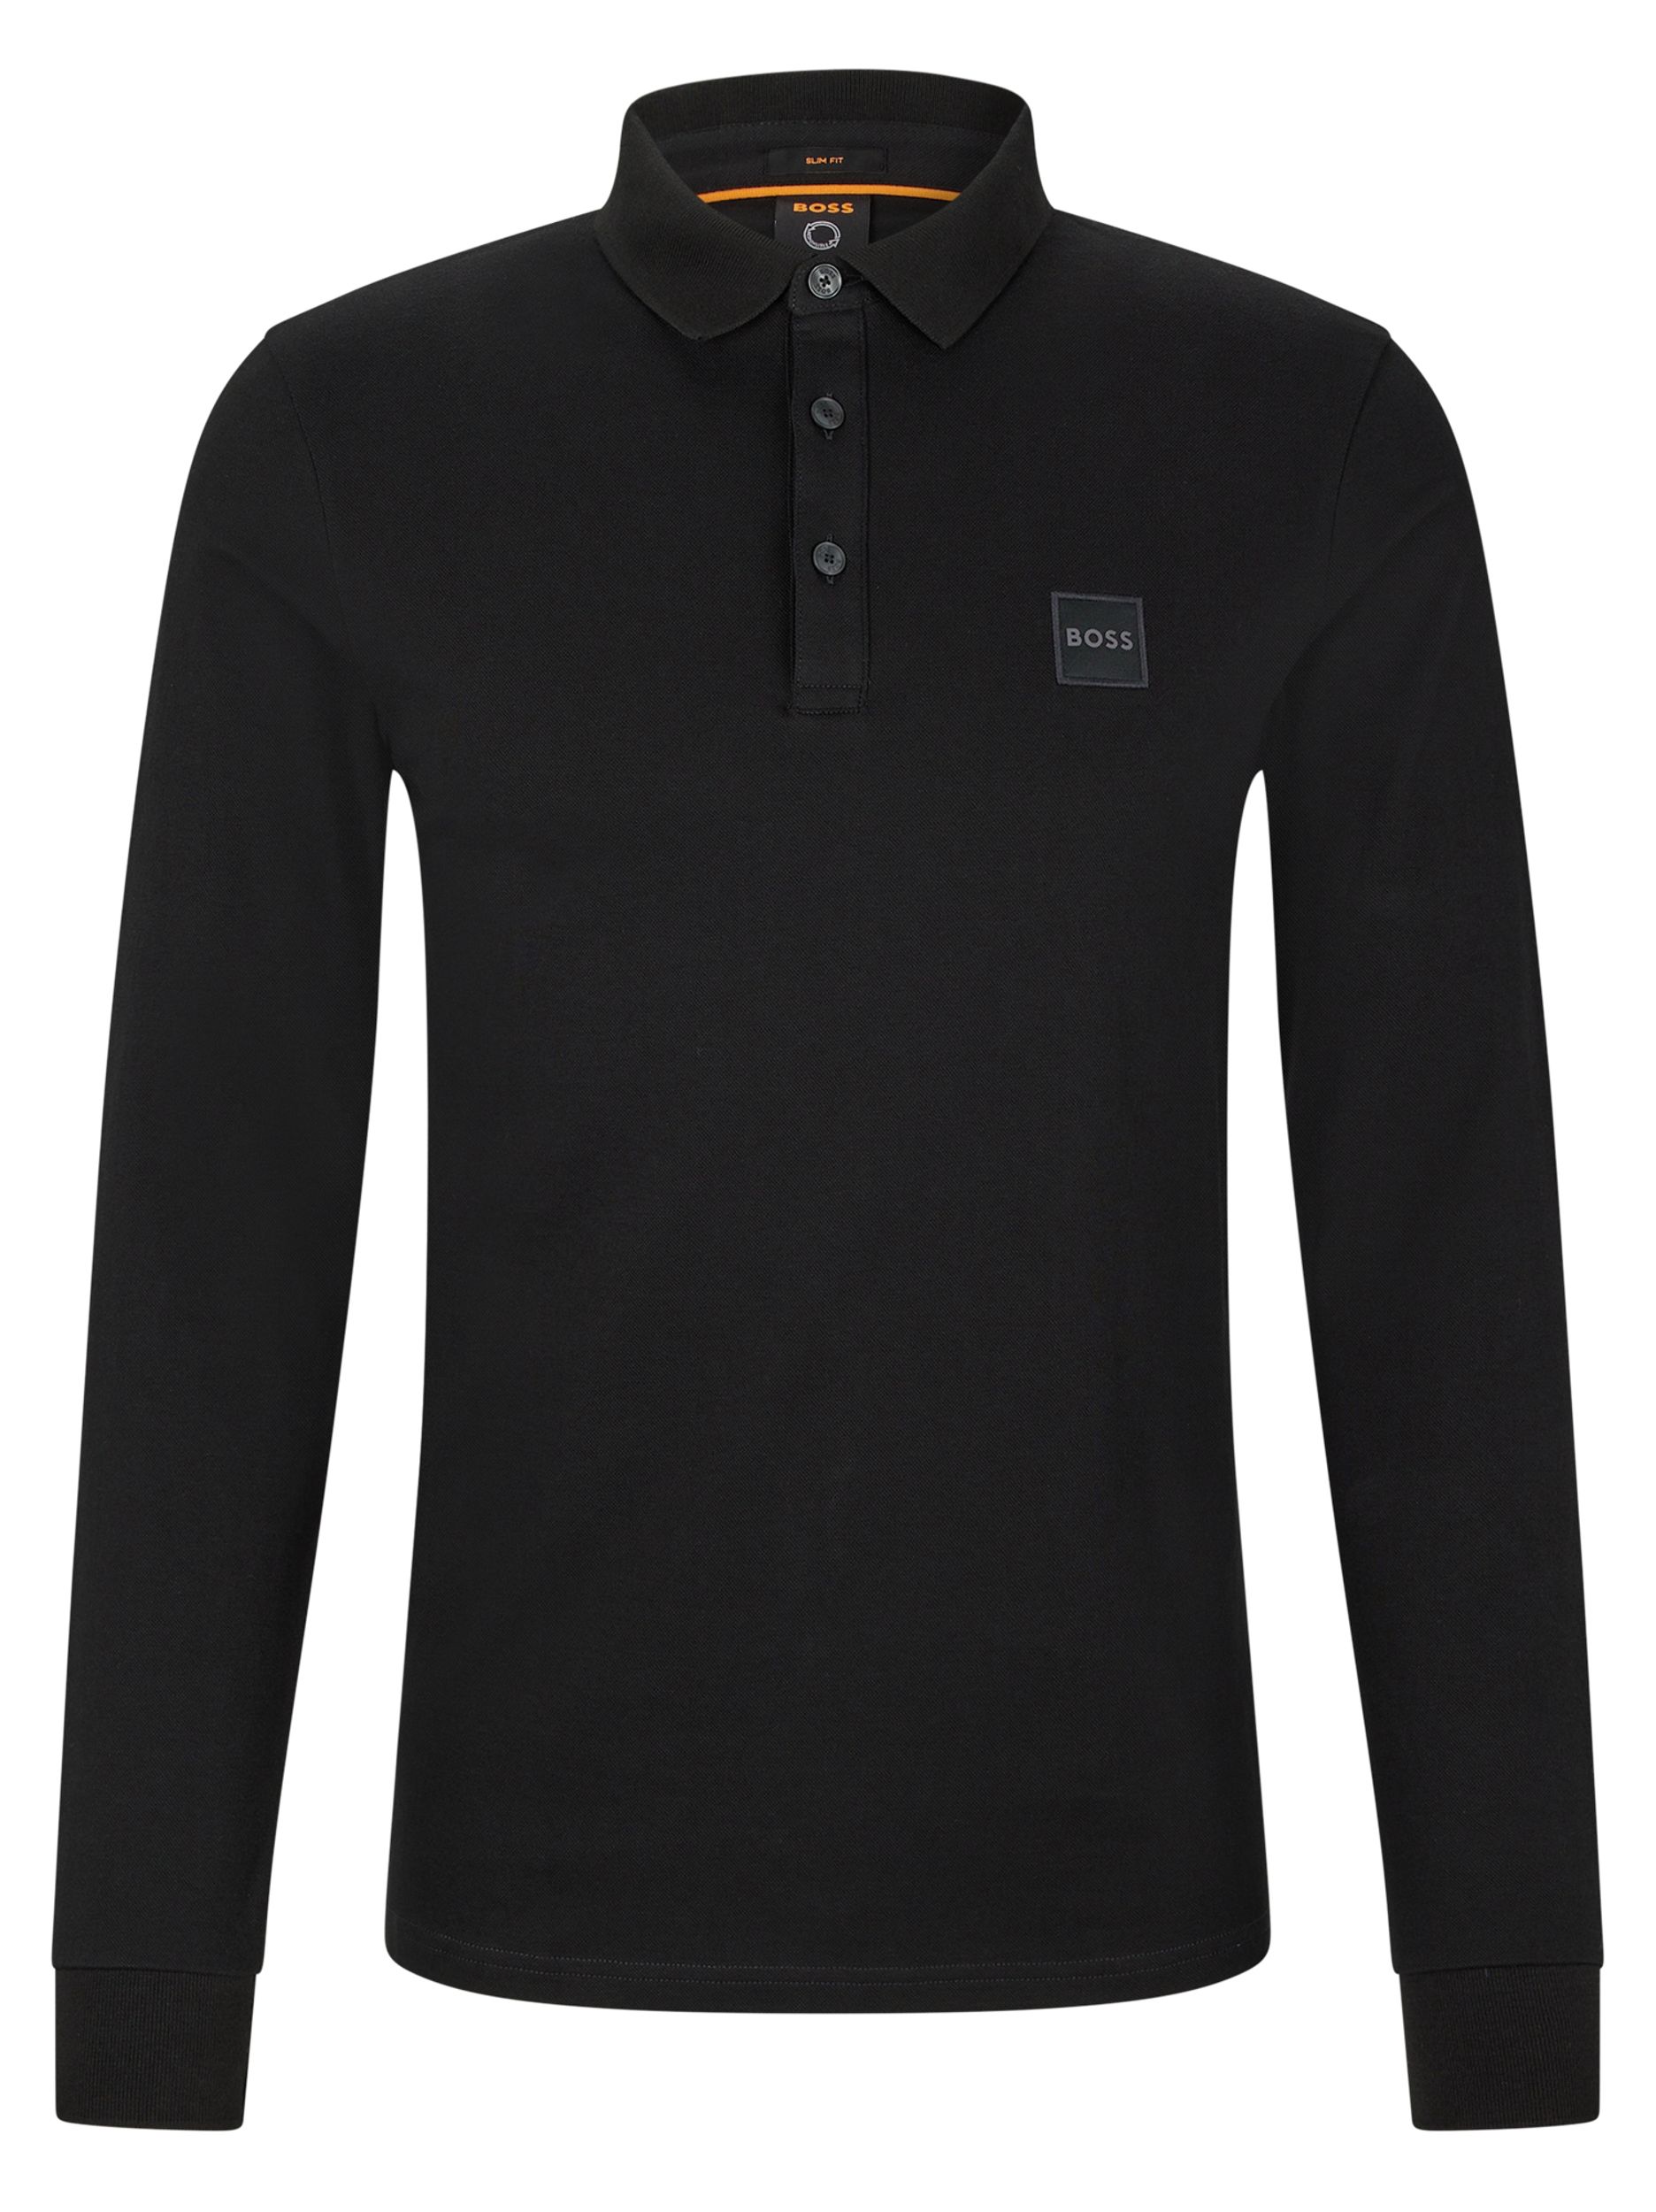 Hugo Boss Casual Passerby Polo LM Zwart 074040-001-L